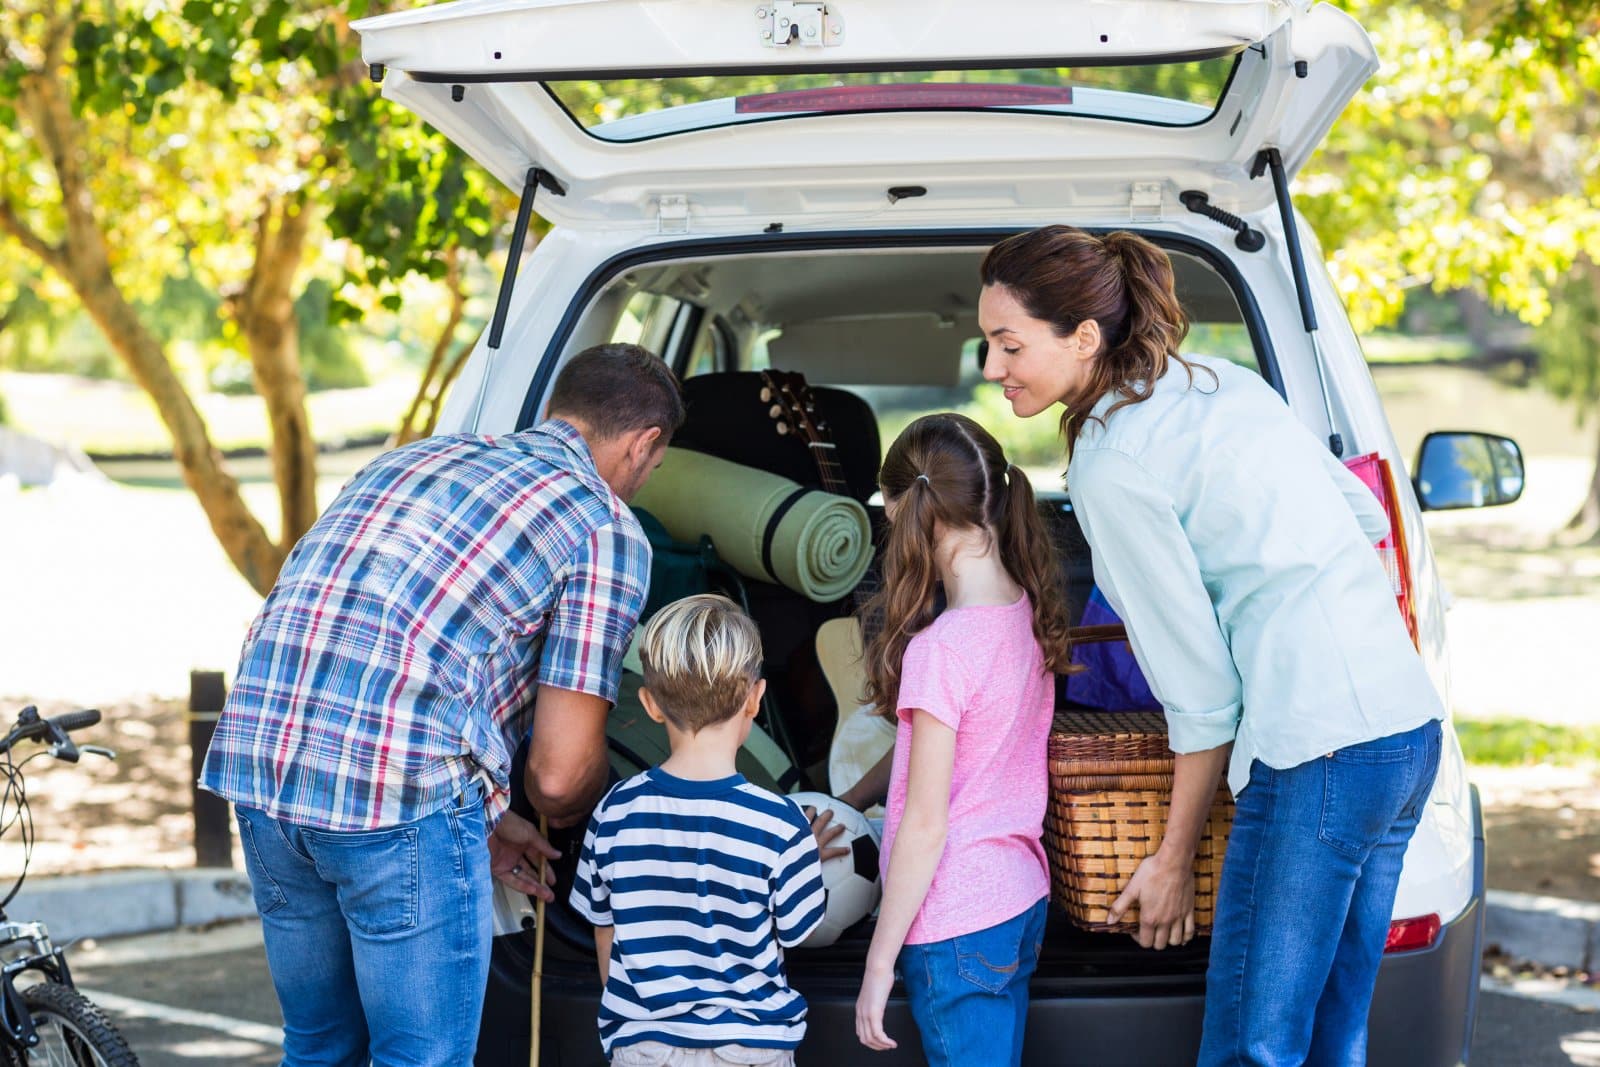 <p class="wp-caption-text">Image Credit: Shutterstock / wavebreakmedia</p>  <p><span>Ensuring your vehicle is up to the task is paramount for a smooth road trip experience. A thorough inspection by a professional mechanic can preempt any potential issues during your journey. Consider your family’s comfort and space requirements; a vehicle crammed with luggage and passengers can quickly become uncomfortable.</span></p> <p><span>Opt for a car with ample legroom, reliable air conditioning, and entertainment options like built-in DVD players or audio systems compatible with mobile devices. This preparation extends beyond mechanical readiness to organize the interior space efficiently, ensuring that essentials are within easy reach and the cabin remains clutter-free and conducive to a pleasant drive. </span></p> <p><span>A reliable and comfortable vehicle is crucial for a successful road trip. Before departure, a comprehensive check-up covering tires, brakes, fluids, and air conditioning can prevent roadside headaches. Consider the size and comfort of your vehicle, especially if you’re traveling with a large family or young children who may need room for car seats and entertainment devices.</span></p> <p><b>Insider’s Tip:</b><span> Renting a vehicle can be a wise choice for long trips. Opt for models with high safety ratings and amenities like DVD players or built-in GPS to enhance the travel experience.</span></p>